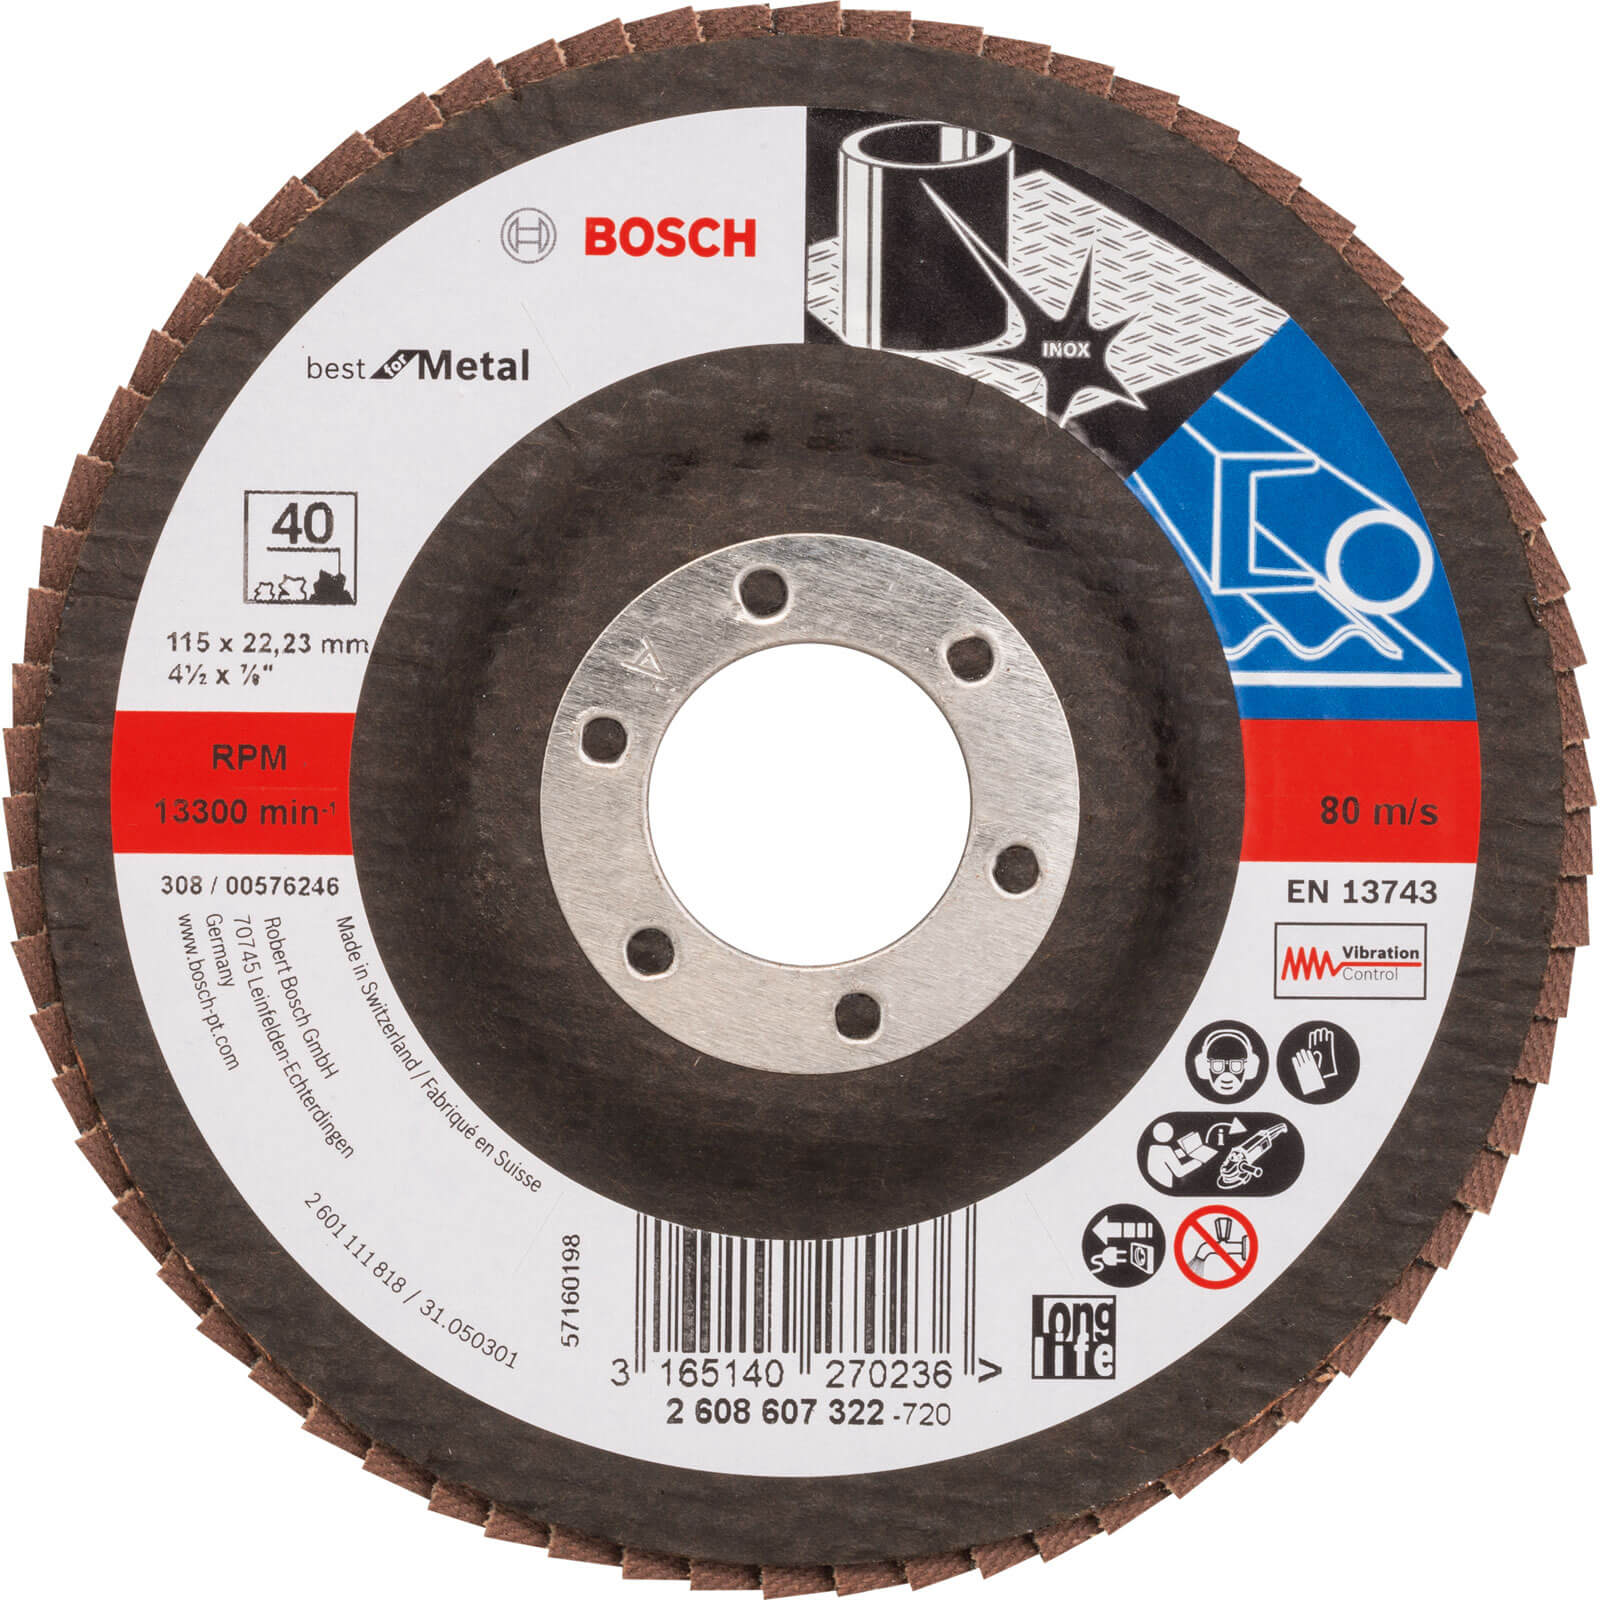 Photos - Cutting Disc Bosch X571 Best for Metal Straight Flap Disc 115mm 40g Pack of 1 260860732 